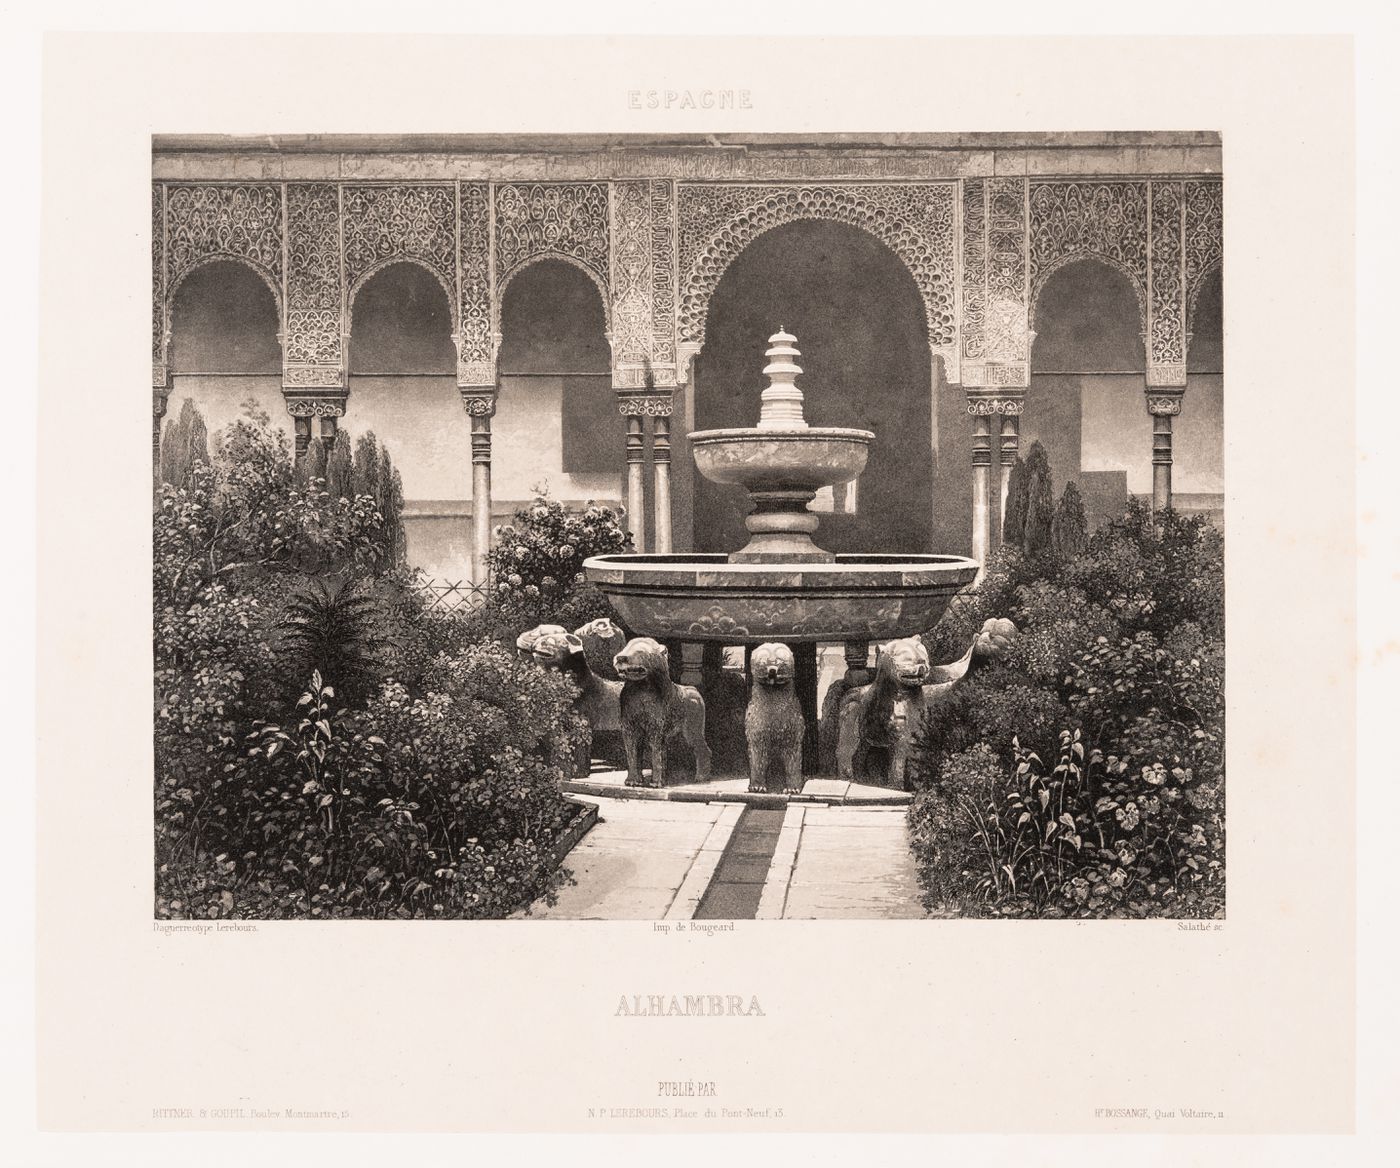 View of The Court of the Lions with fountain at Alhambra, Spain